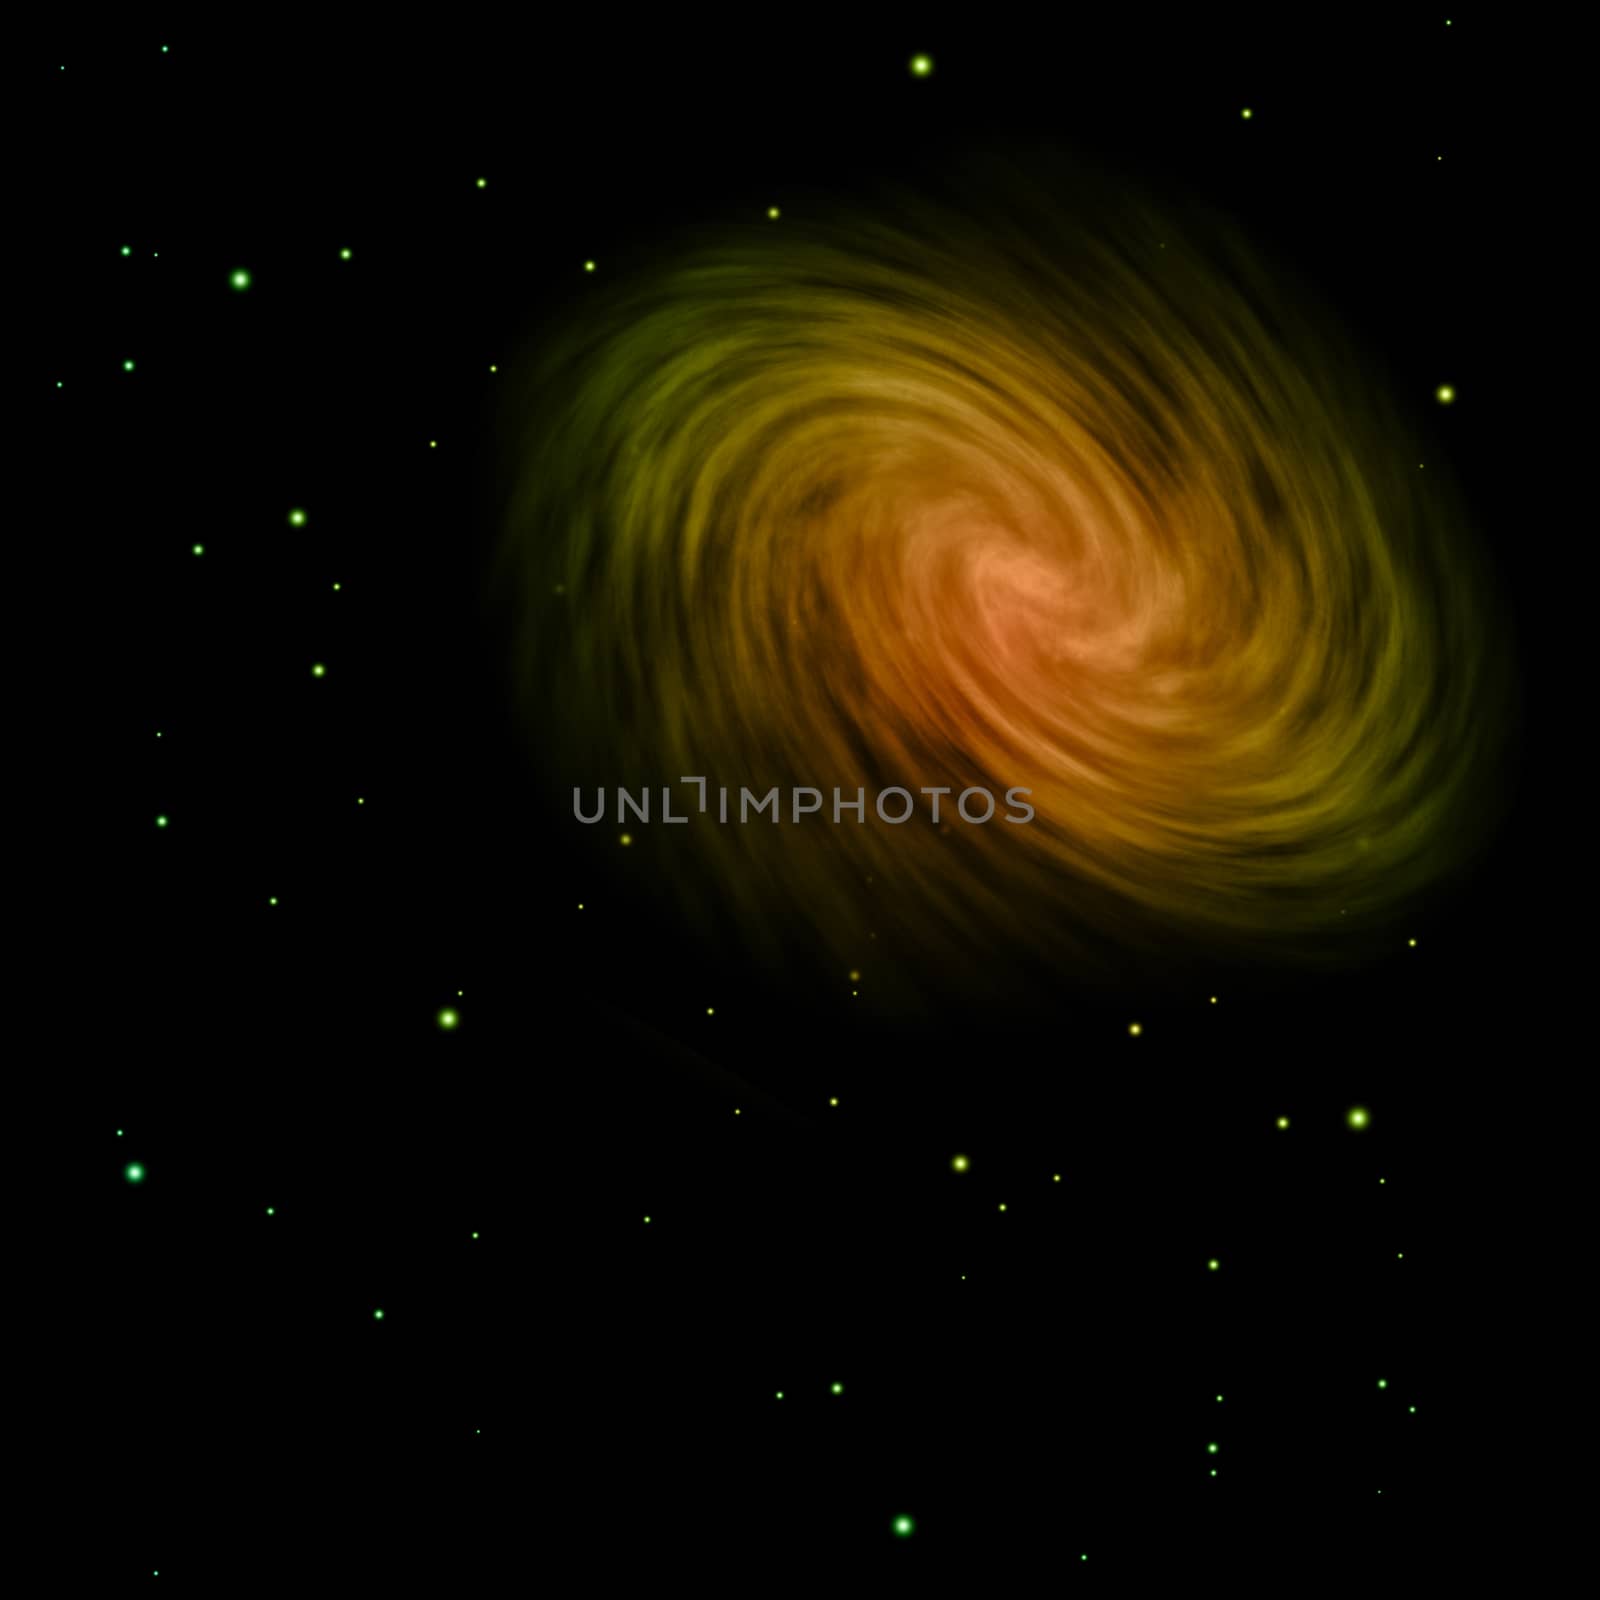 Stars and spiral galaxy in a free space. "Elements of this image furnished by NASA".